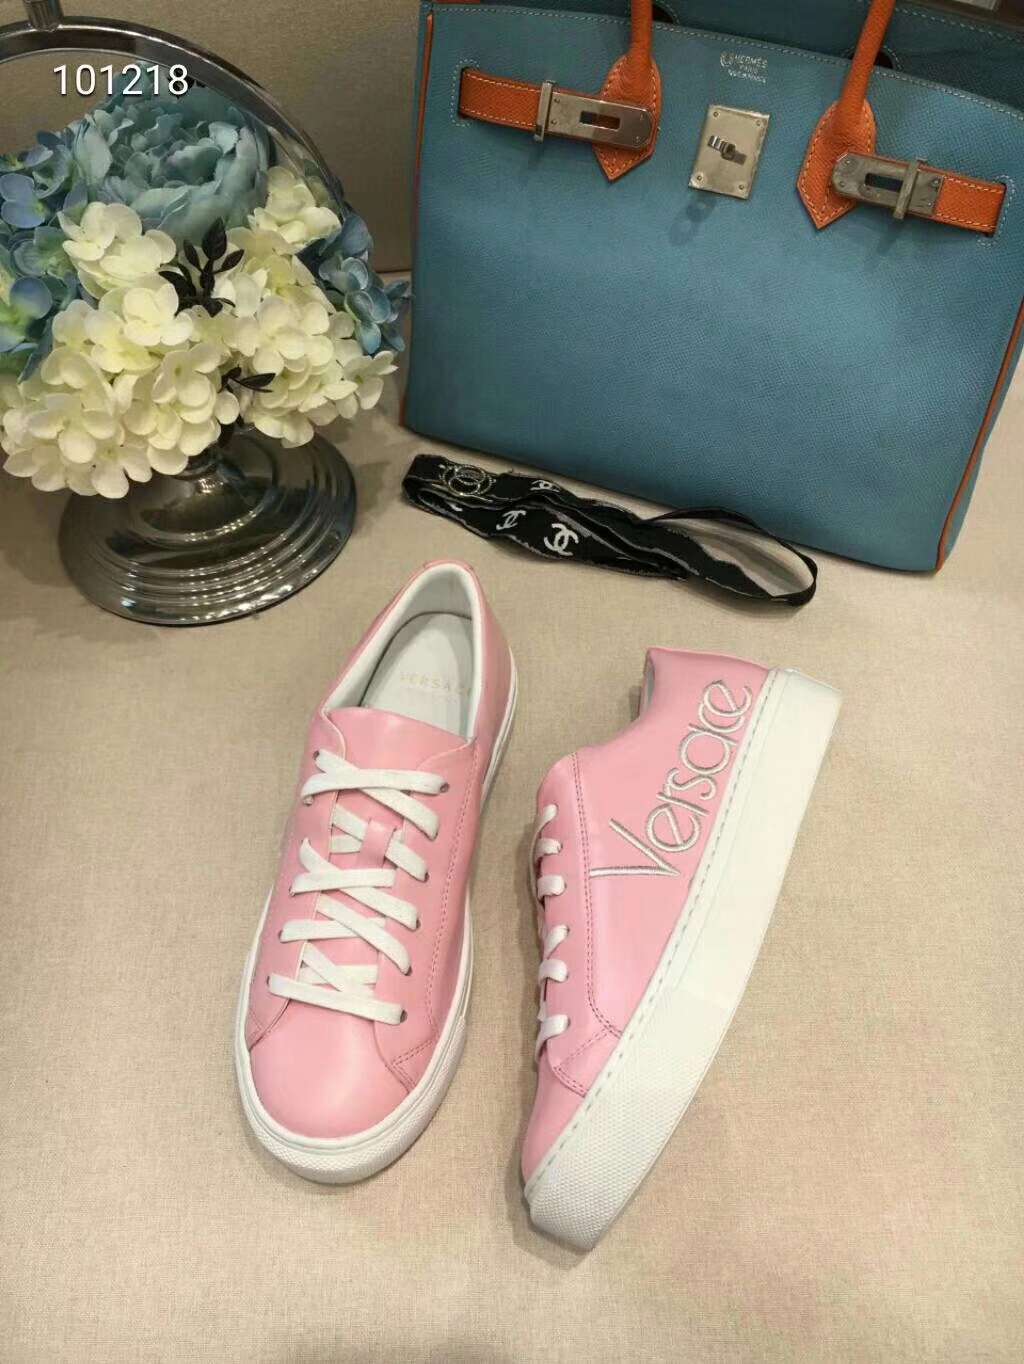 2019 NEW Versace Real leather shoes VERSACE101218pink